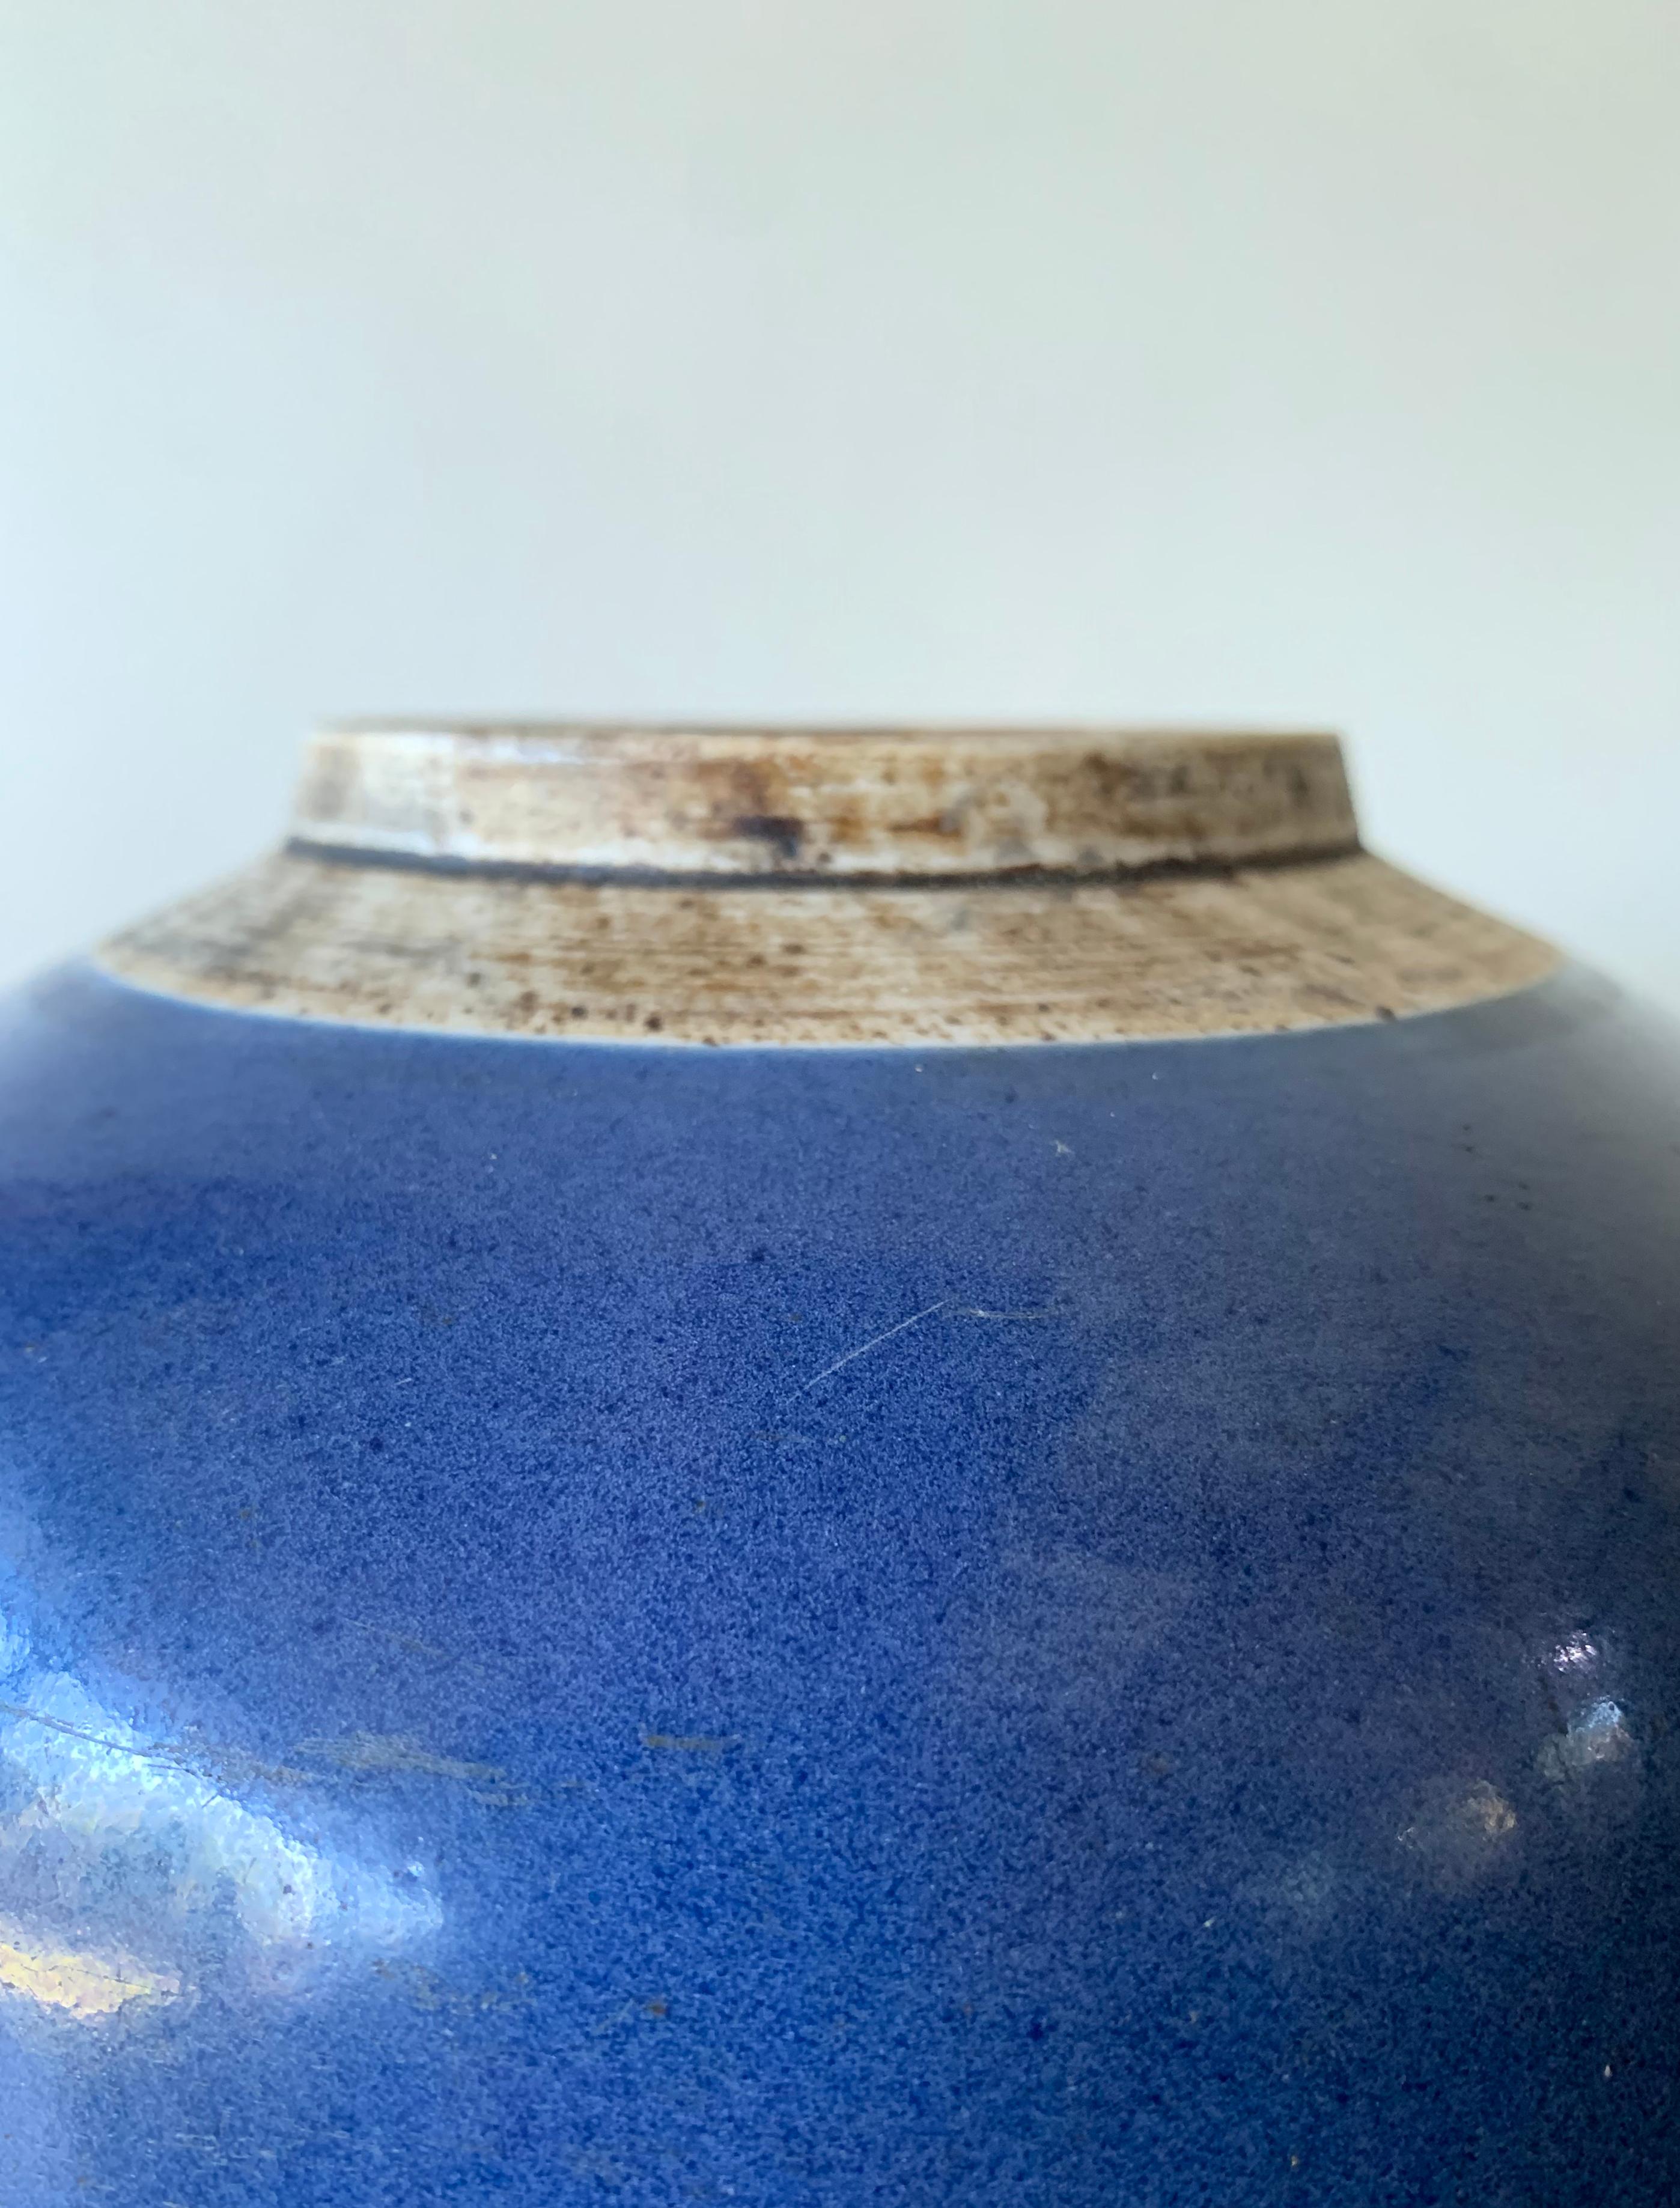 Glazed Blue Chinese Ceramic Ginger Jar with Metal Top, Early 20th Century For Sale